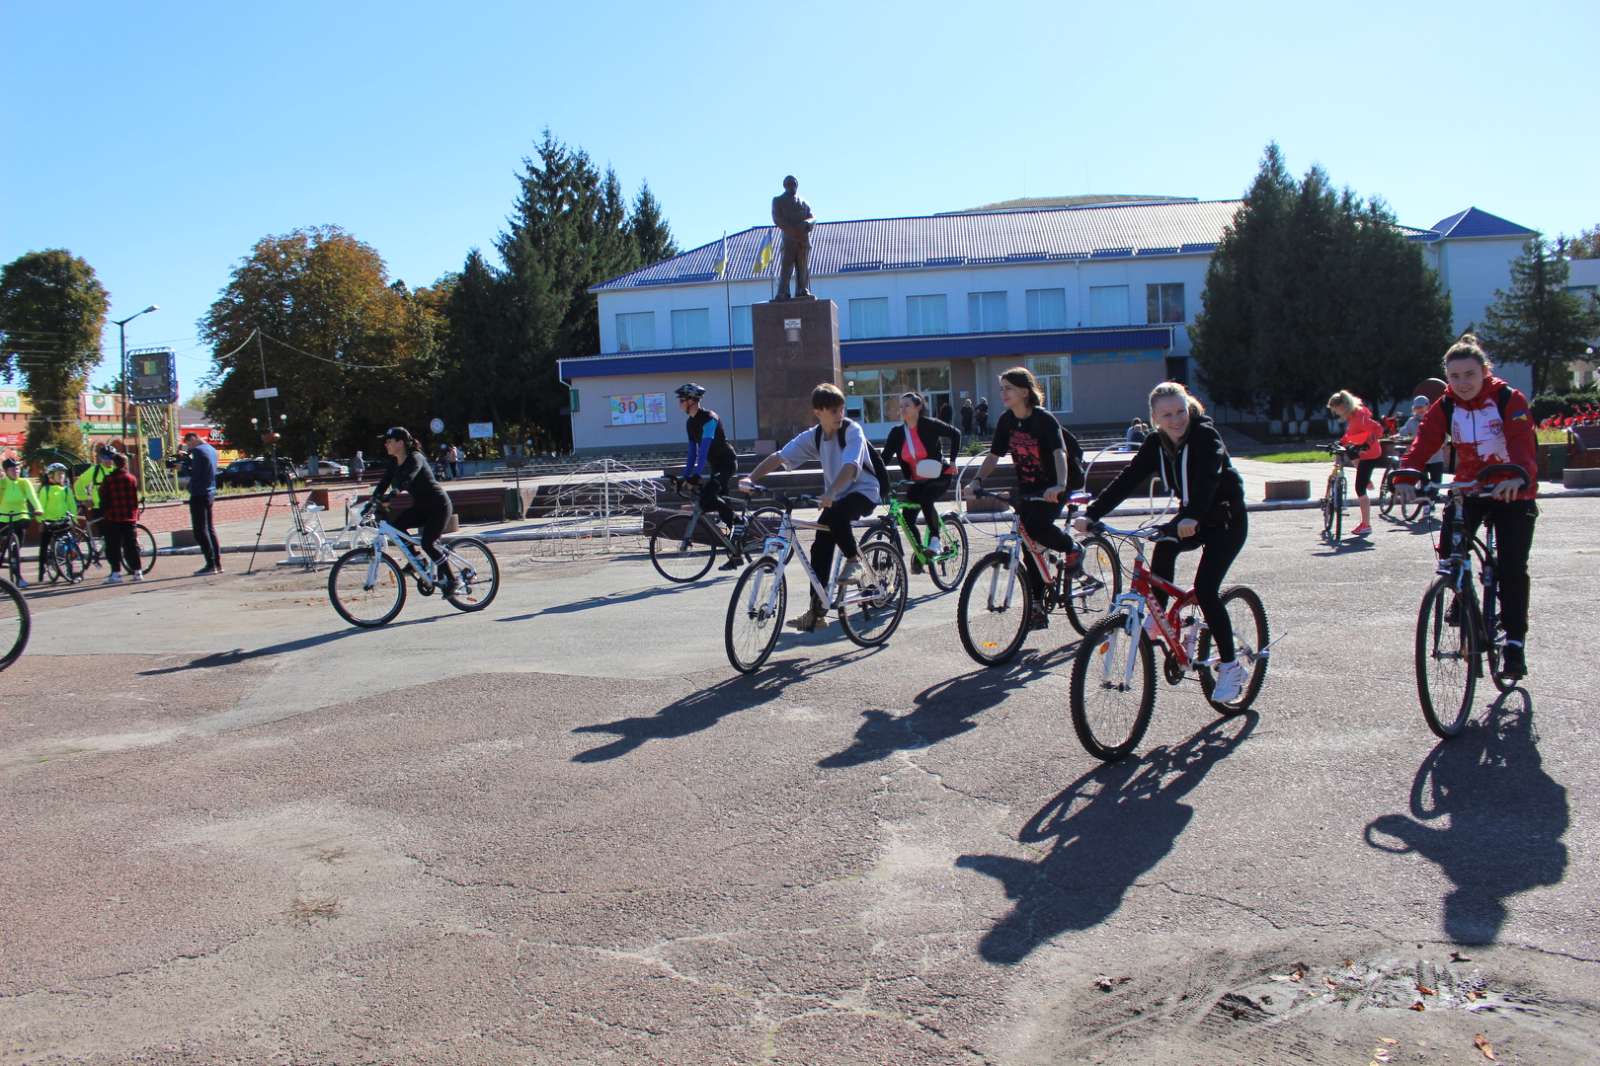 Conducting the launch event – Biking Day  in the community. Implementation of the Go bike Chernihiv project. 